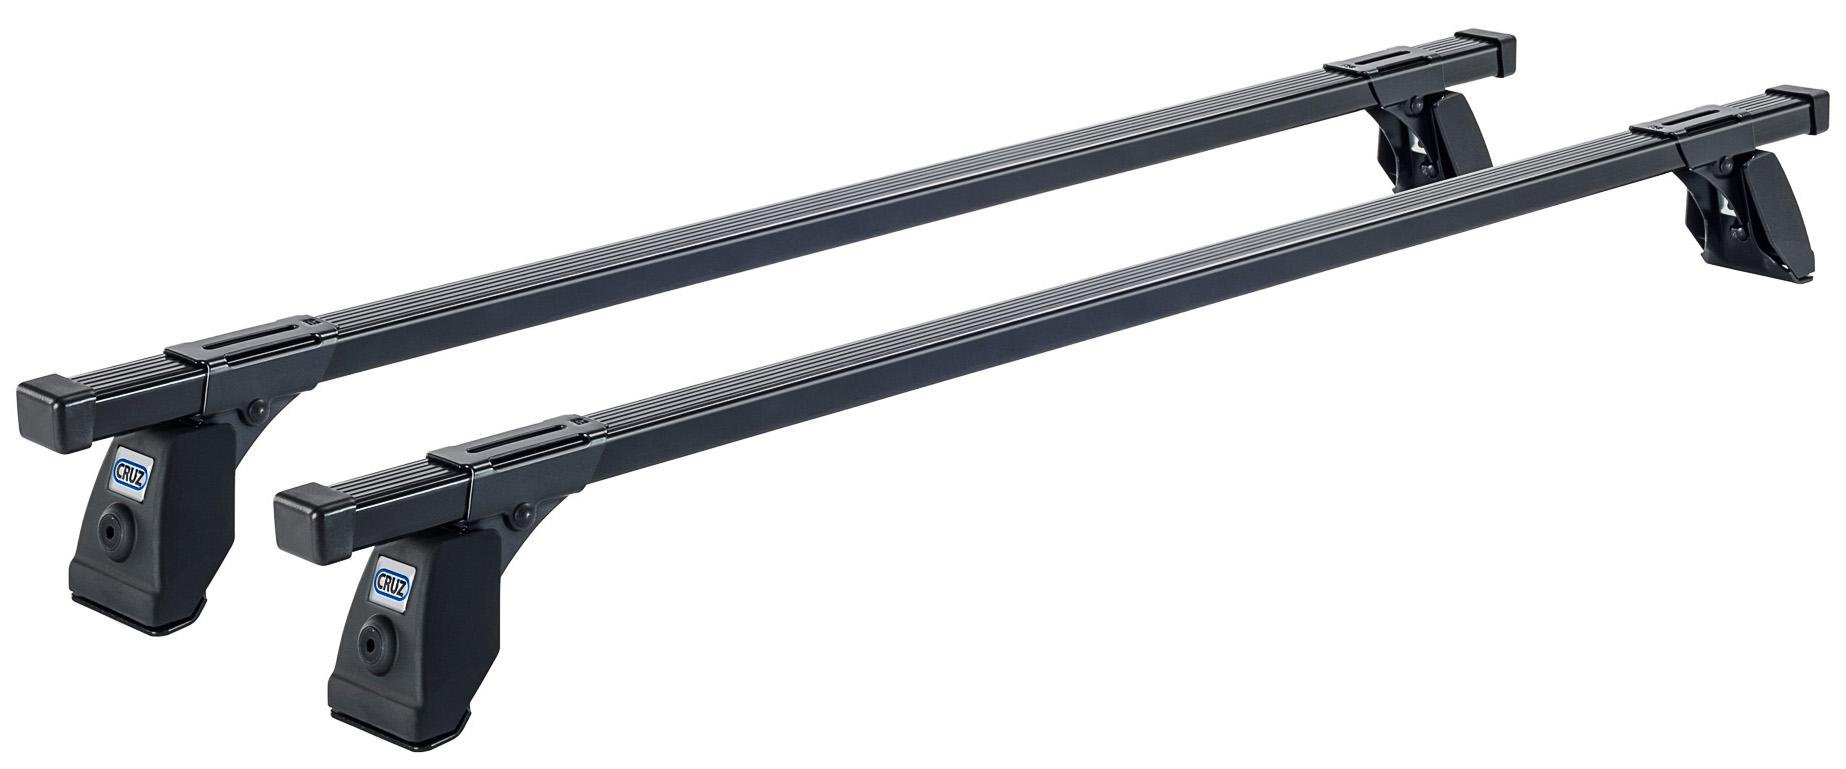 Cruz Commercial Roof Bars 30 X 20 922-422 - Pack Of 2